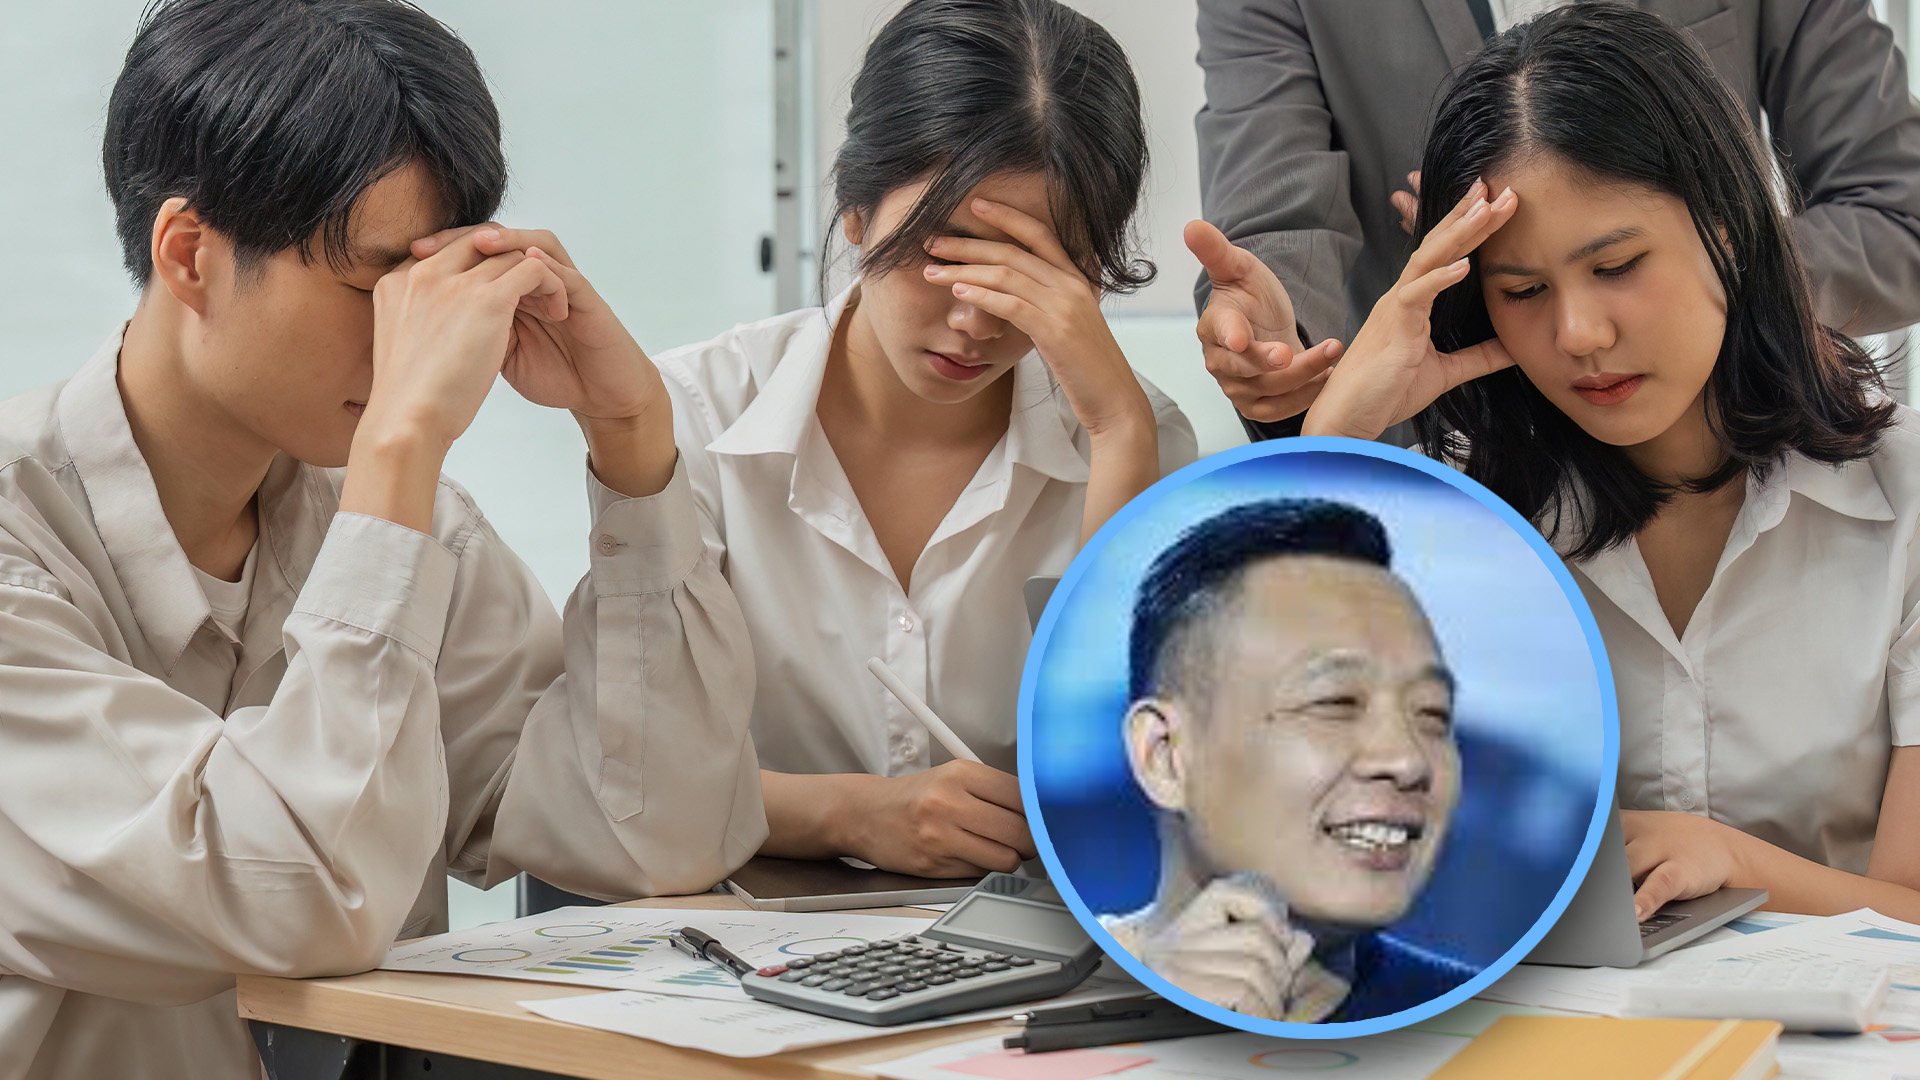 A retail tycoon in China has earned widespread praise after he told his staff they could take paid “unhappy leave” from work when they are down in the dumps. Photo: SCMP composite/Shutterstock/Weibo
